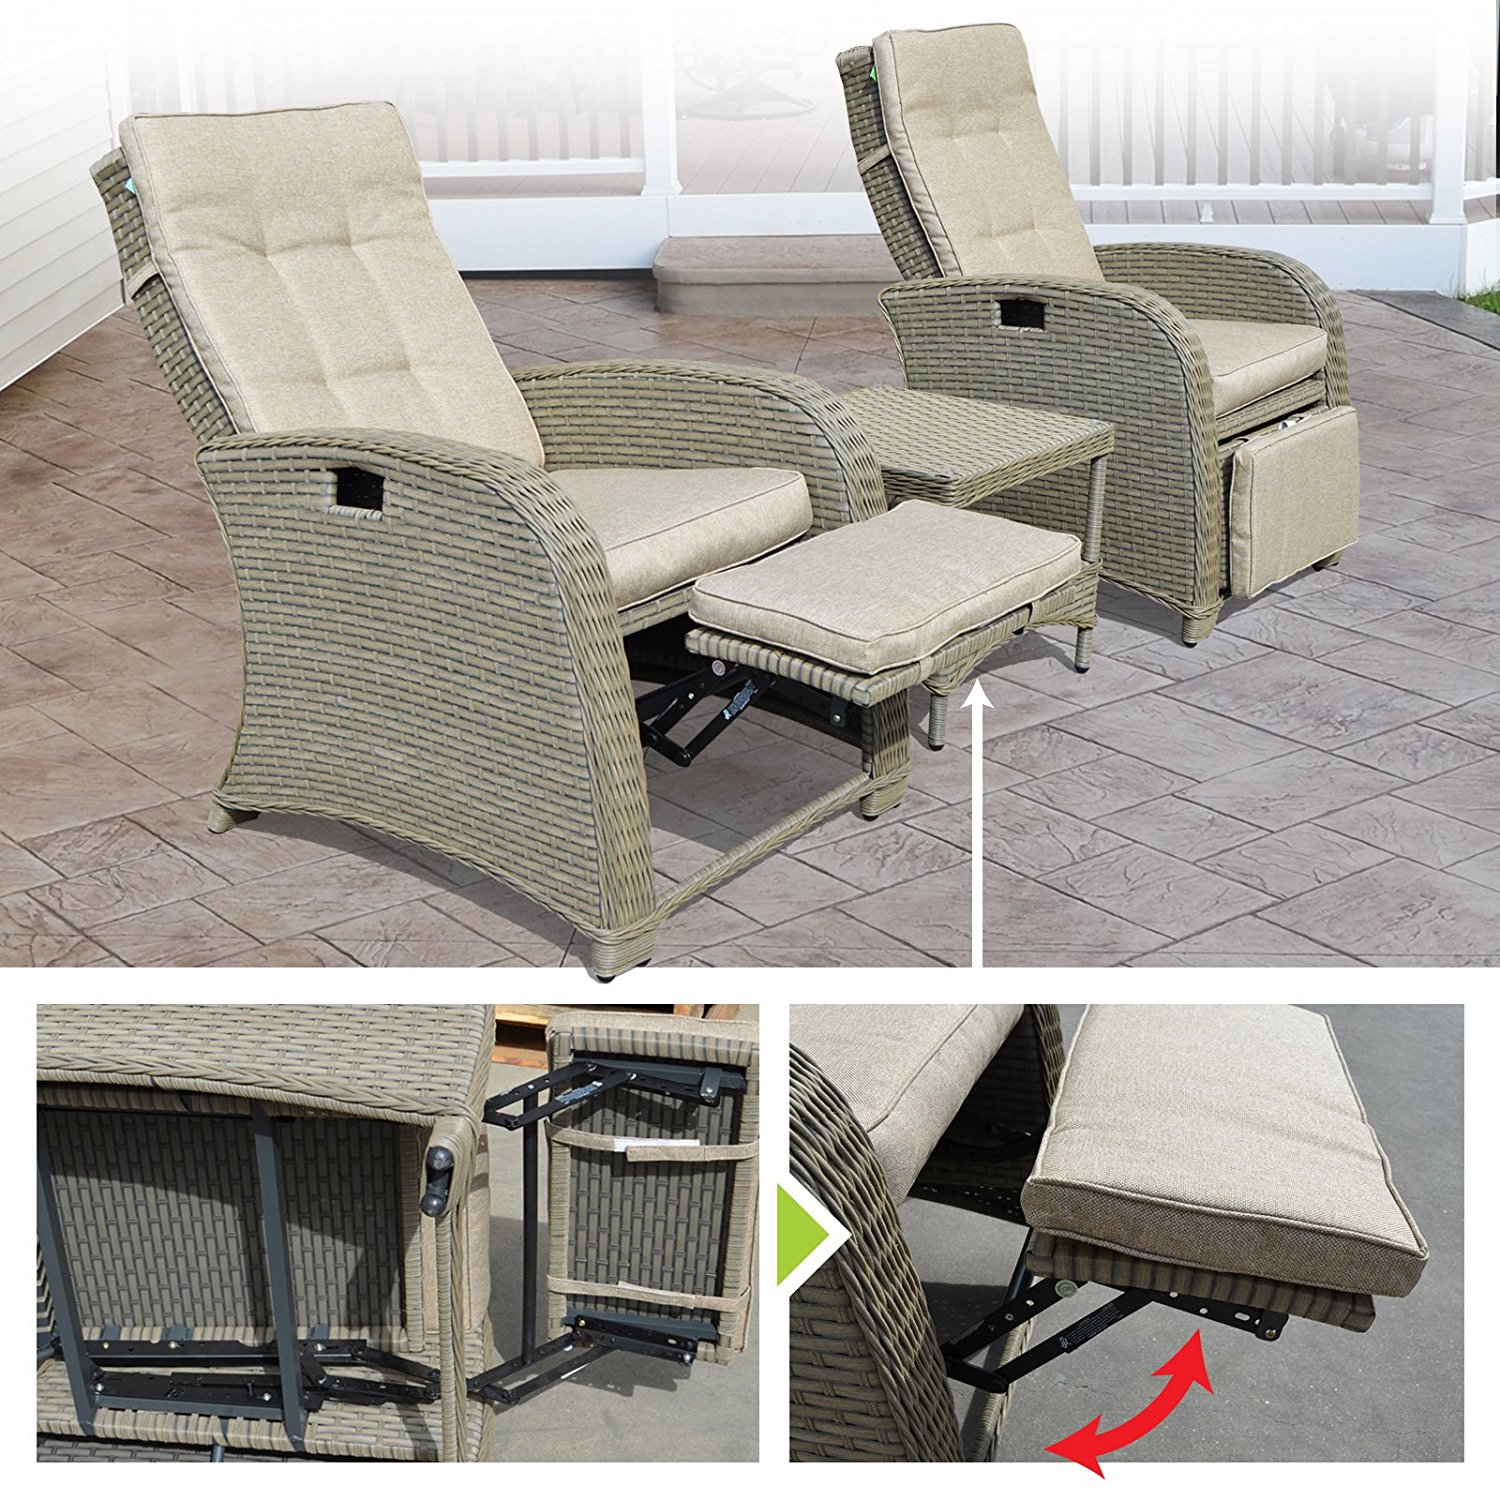 Sunny 3pcs Wicker Rattan Lounge Table & Chair Set Patio Furniture Outdoor Garden With Cushion Seat - image 3 of 6